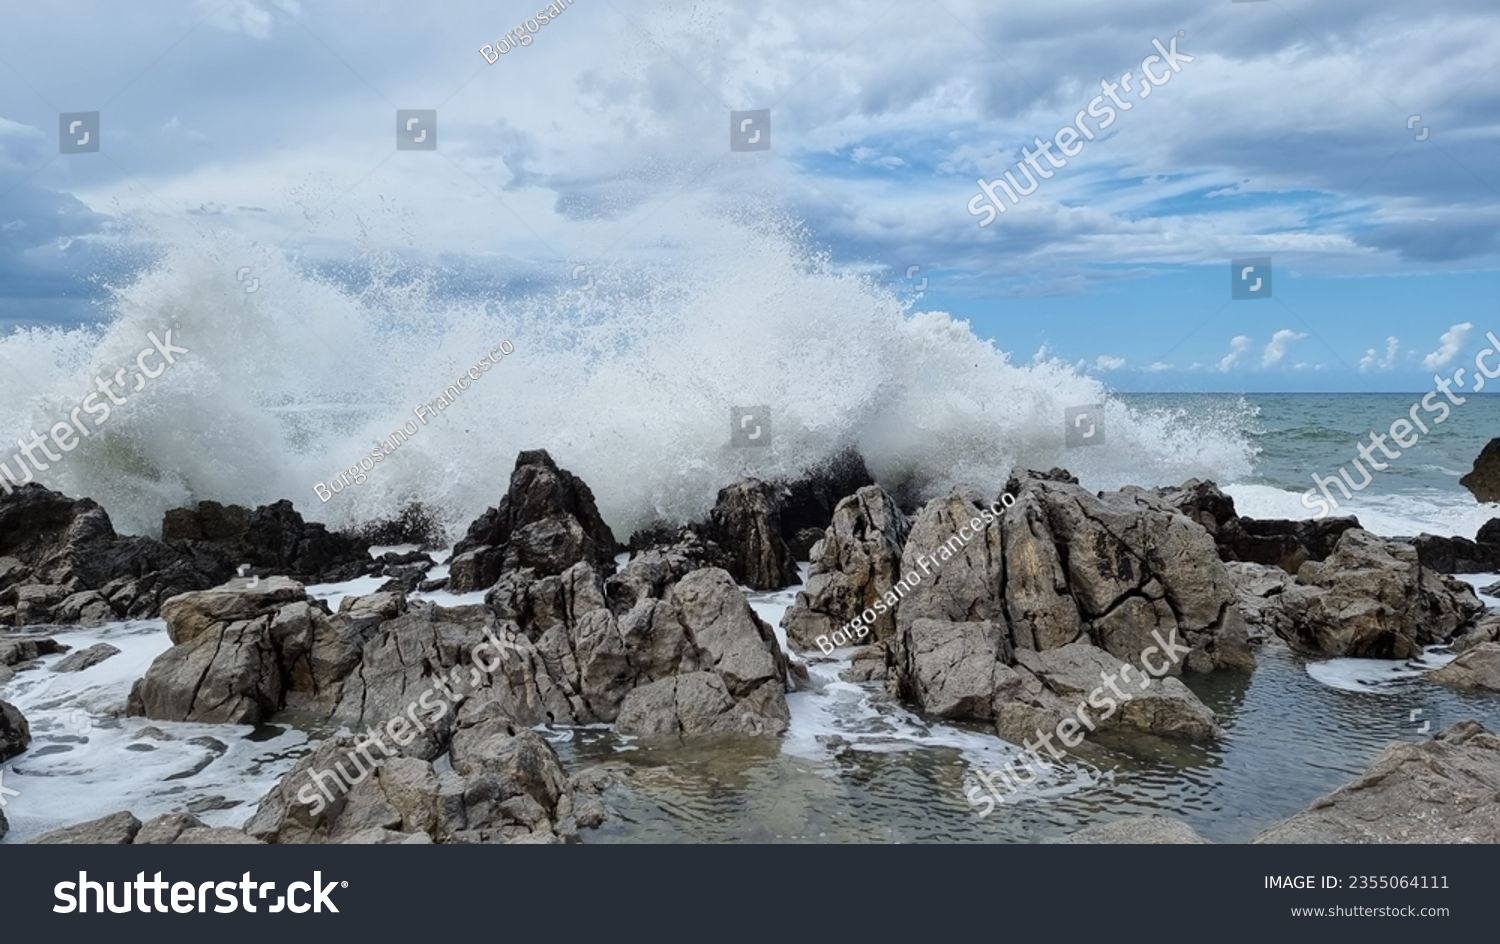 Sea surf that expands in the air during. Sea driven by the fresh Mistral wind. Freedom of nature. Ancient rocks that on the coast embrace the impetuous sea that breaks furiously #2355064111